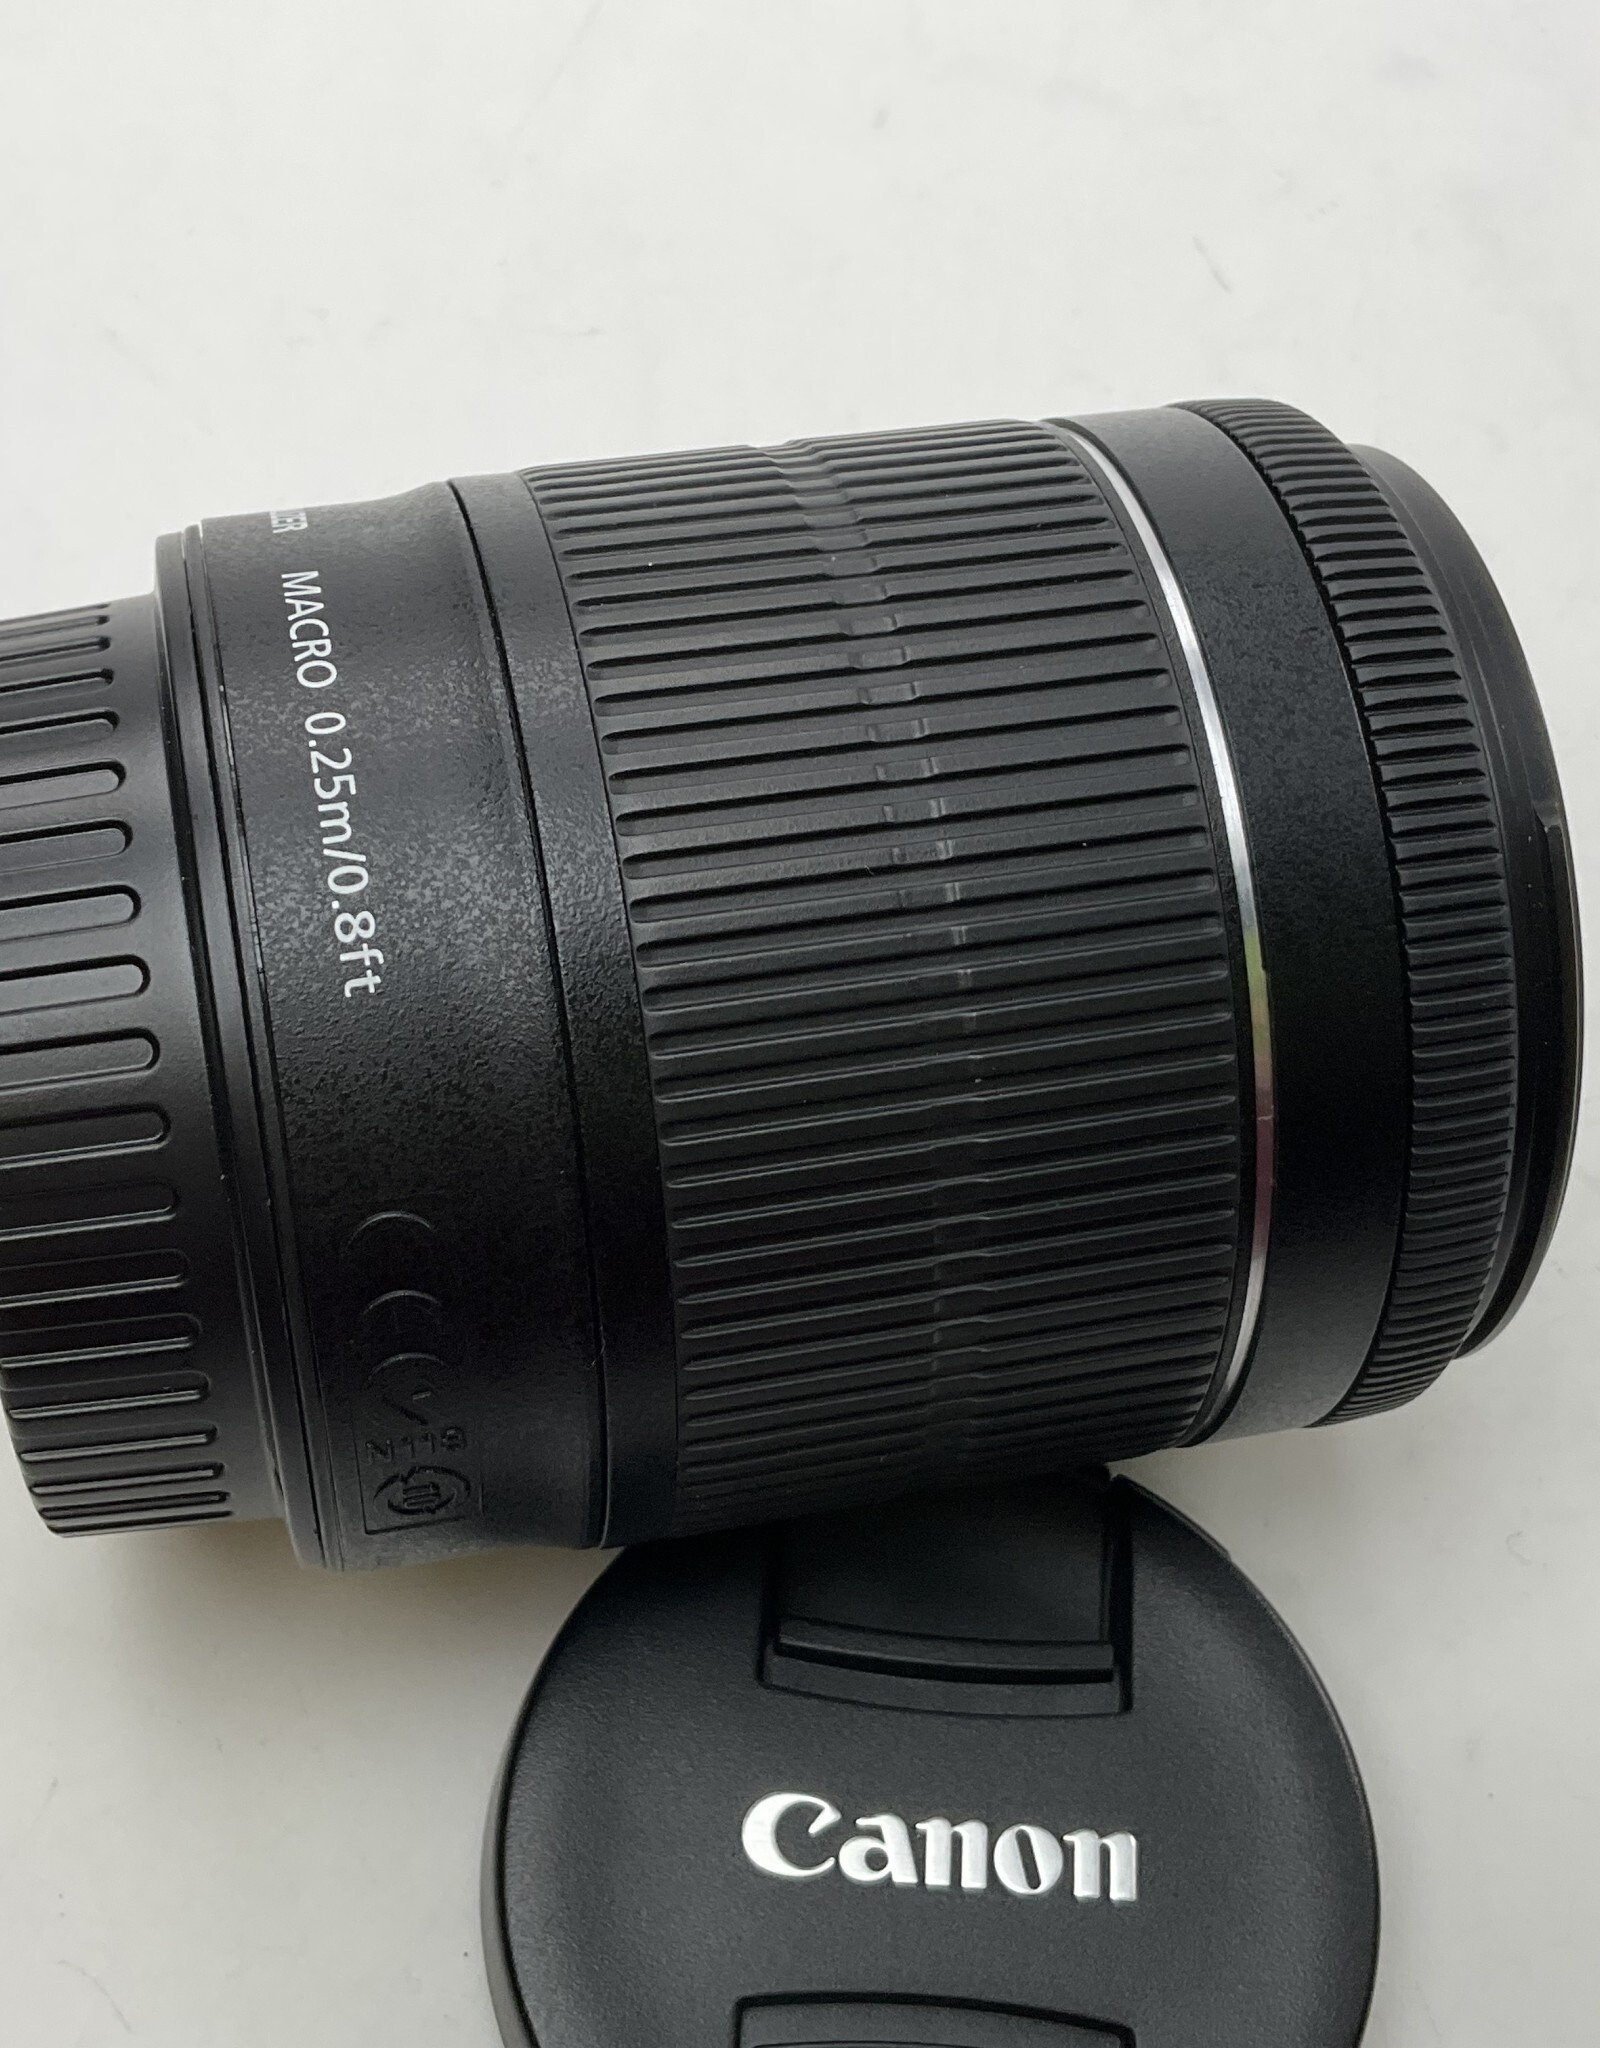 CANON Canon EF-S 18-55mm f3.5-5.6 IS STM Lens Used Good